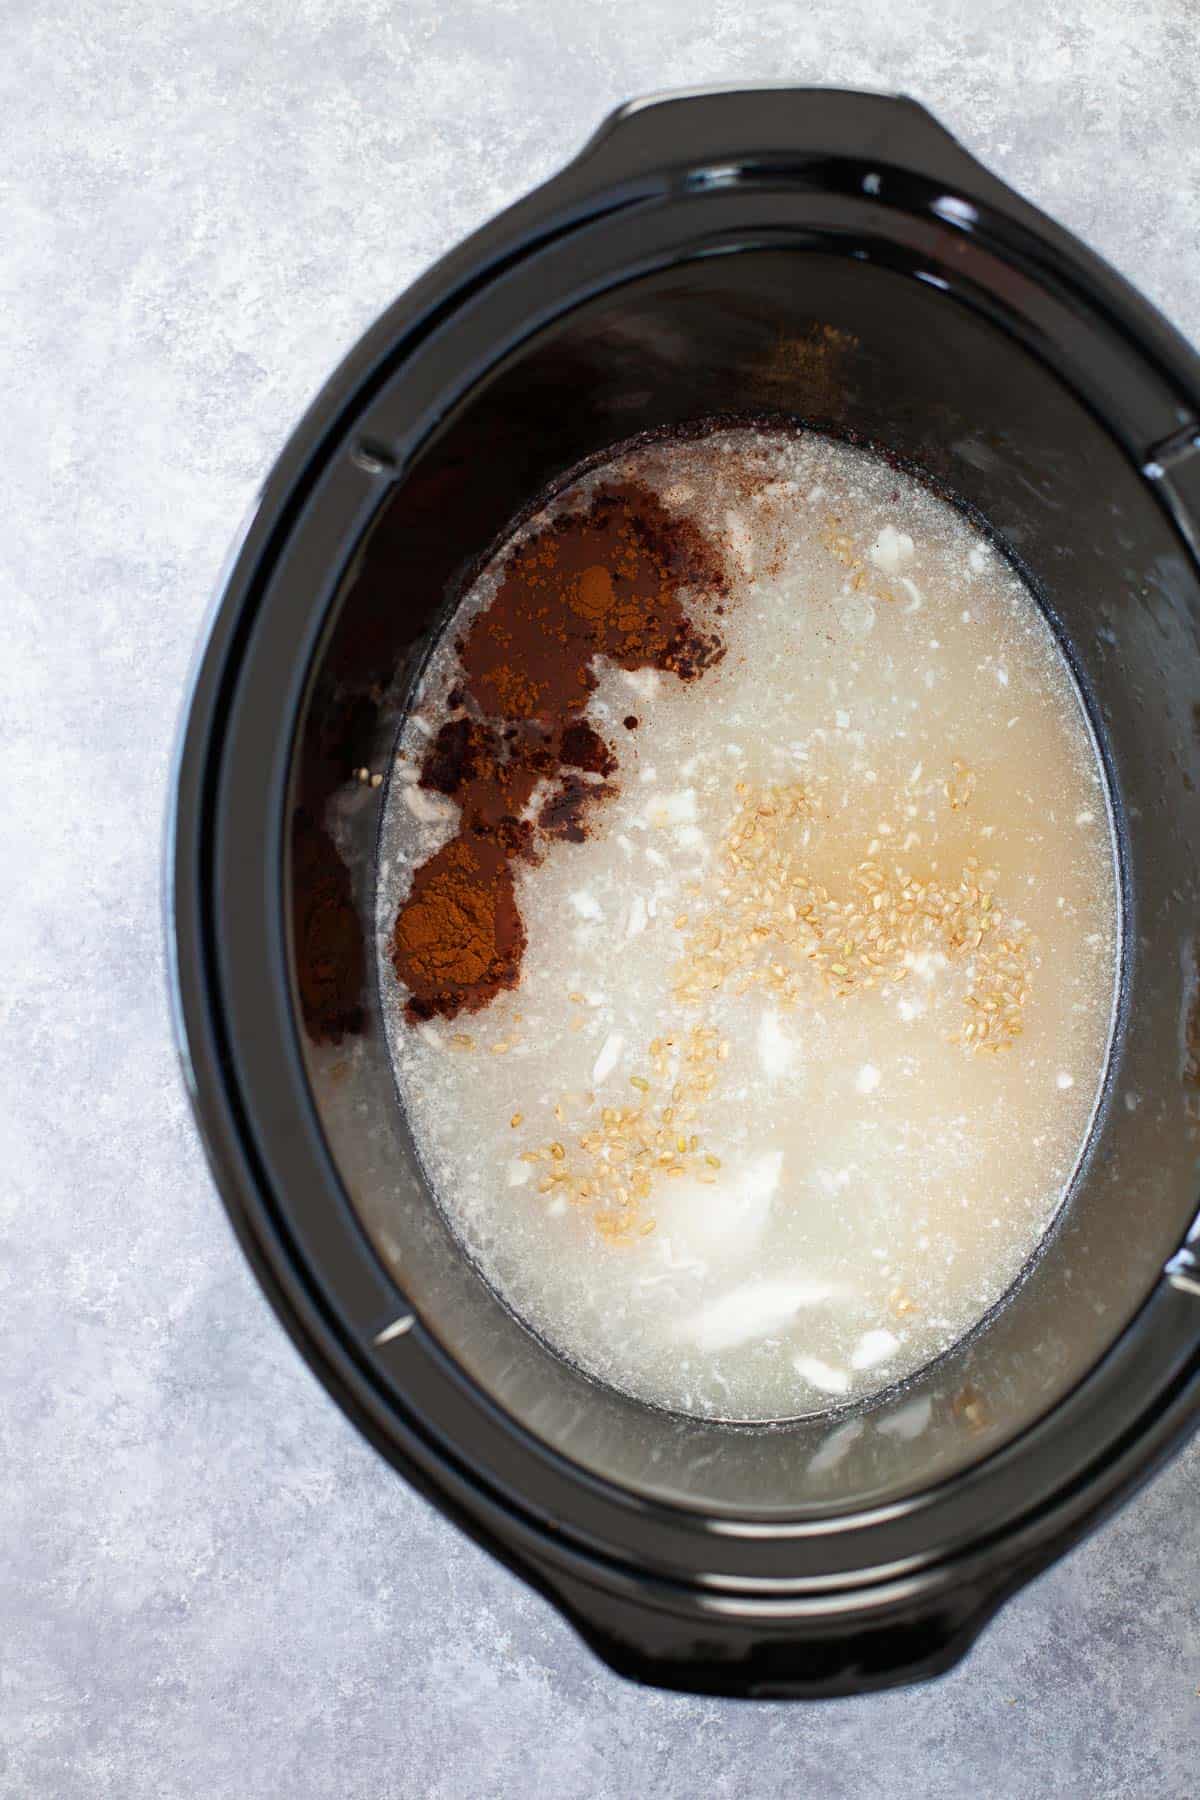 brown rice, coconut milk, and cinnamon placed in a slow cooker